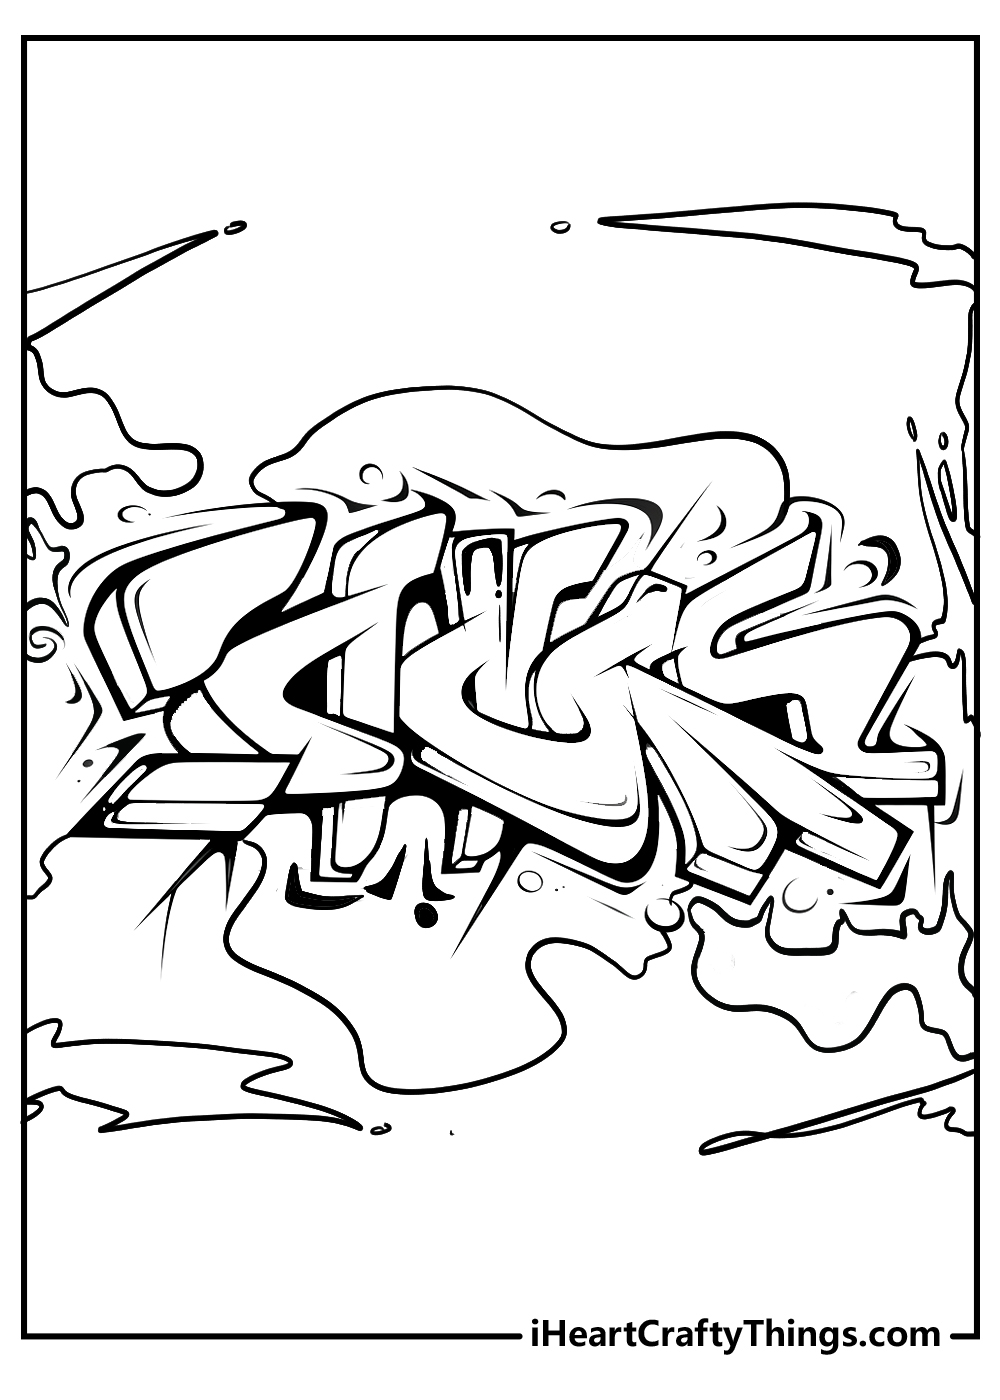 graffiti coloring pages free download